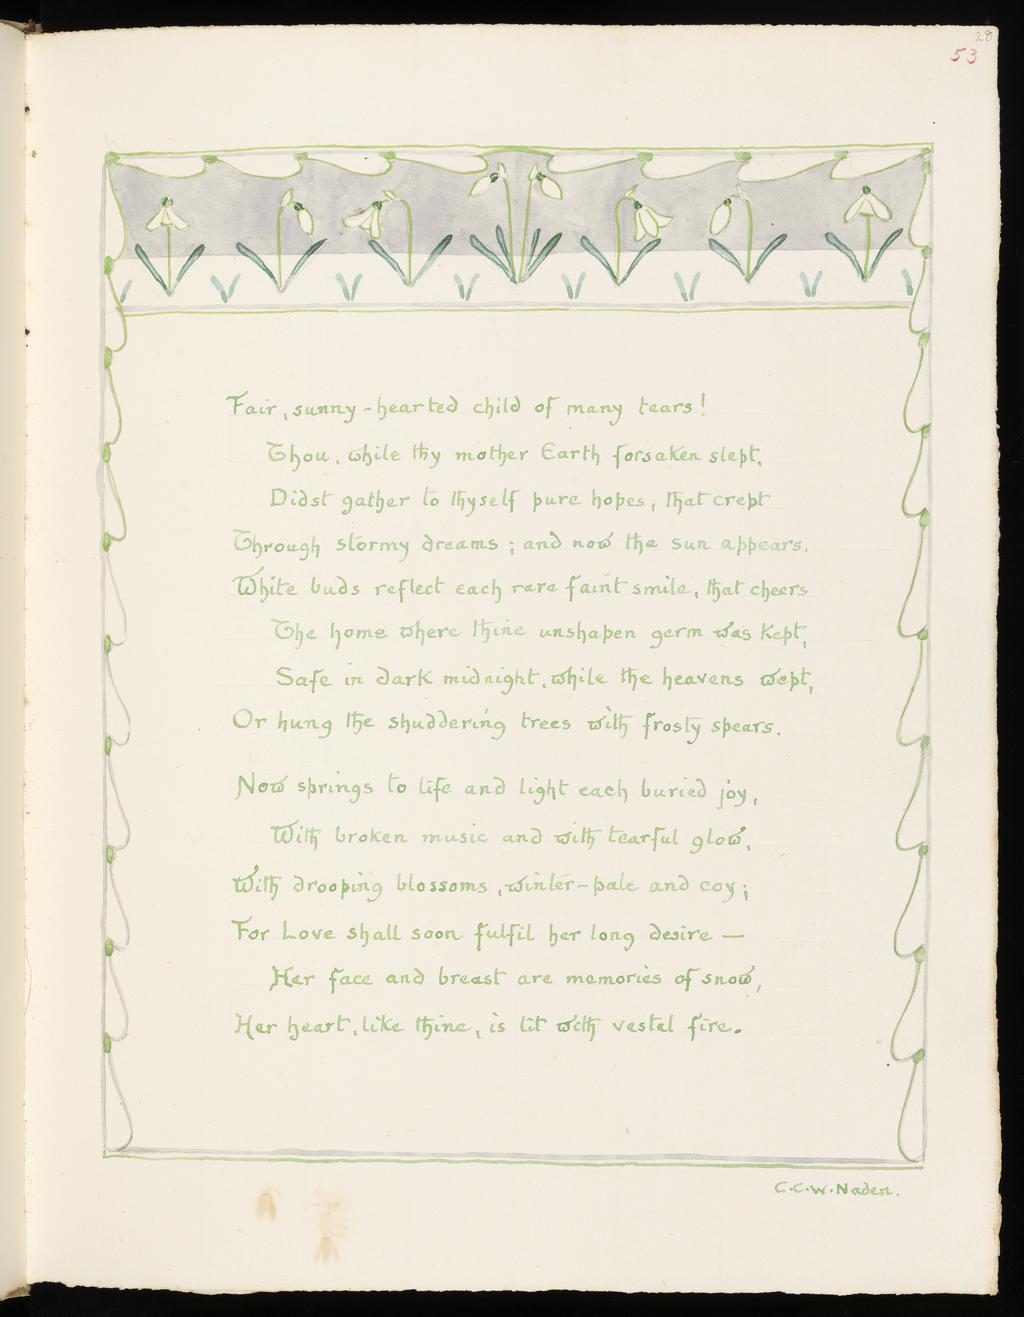 An image of Inscription surrounded by floral border: Snowdrop. Inscription surrounded by floral border: Pine. Bicknell, Clarence (British, 1842-1918). Watercolour over graphite on paper, height, leaf, 326  mm, width, leaf, 255 mm, 1908. Part of: A Posy. Vellum-bound sketchbook containing leaves with an index at the end. Cover with brown leather ornamentation and remains of vellum closure straps. Inscription(s): Recto, upper right; watercolour; 53. Recto; watercolour; Fair, sunny-hearted child of many tears! / Thou, while thy mother Earth forsaken slept, / Didst gather to thyself pure hopes, that crept / Through stormy dreams; and now the sun appears, / White buds reflect each rare faint smile, that cheers / The home where thine unshapen germ was kept, / Safe in dark midnight, while the heavens wept, / Or hung the shuddering trees with frosty spears. / Now springs to life and light each buried joy, / With broken music and with tearful glow, / With drooping blossoms, winter-pale and coy; / For Love shall soon fulfil her long desire- / Her face and breast are memories of snow, Her heart, like thin, is lit with vestal fire. / C.C.W. Naden. Verso; watercolour; The elm lets fall its leaves before the frost, / The very oak grows shivering and sere, / The trees are barren when the summer's lost: / But one tree keeps its goodness all the year. / Green pine, unchanging as the days go by, / Thou art thyself beneath whatever sky: / My shelter from all winds, my own strong pine, / 'Tis spring, 'tis summer still, while thou art / mine. / A. Webster.